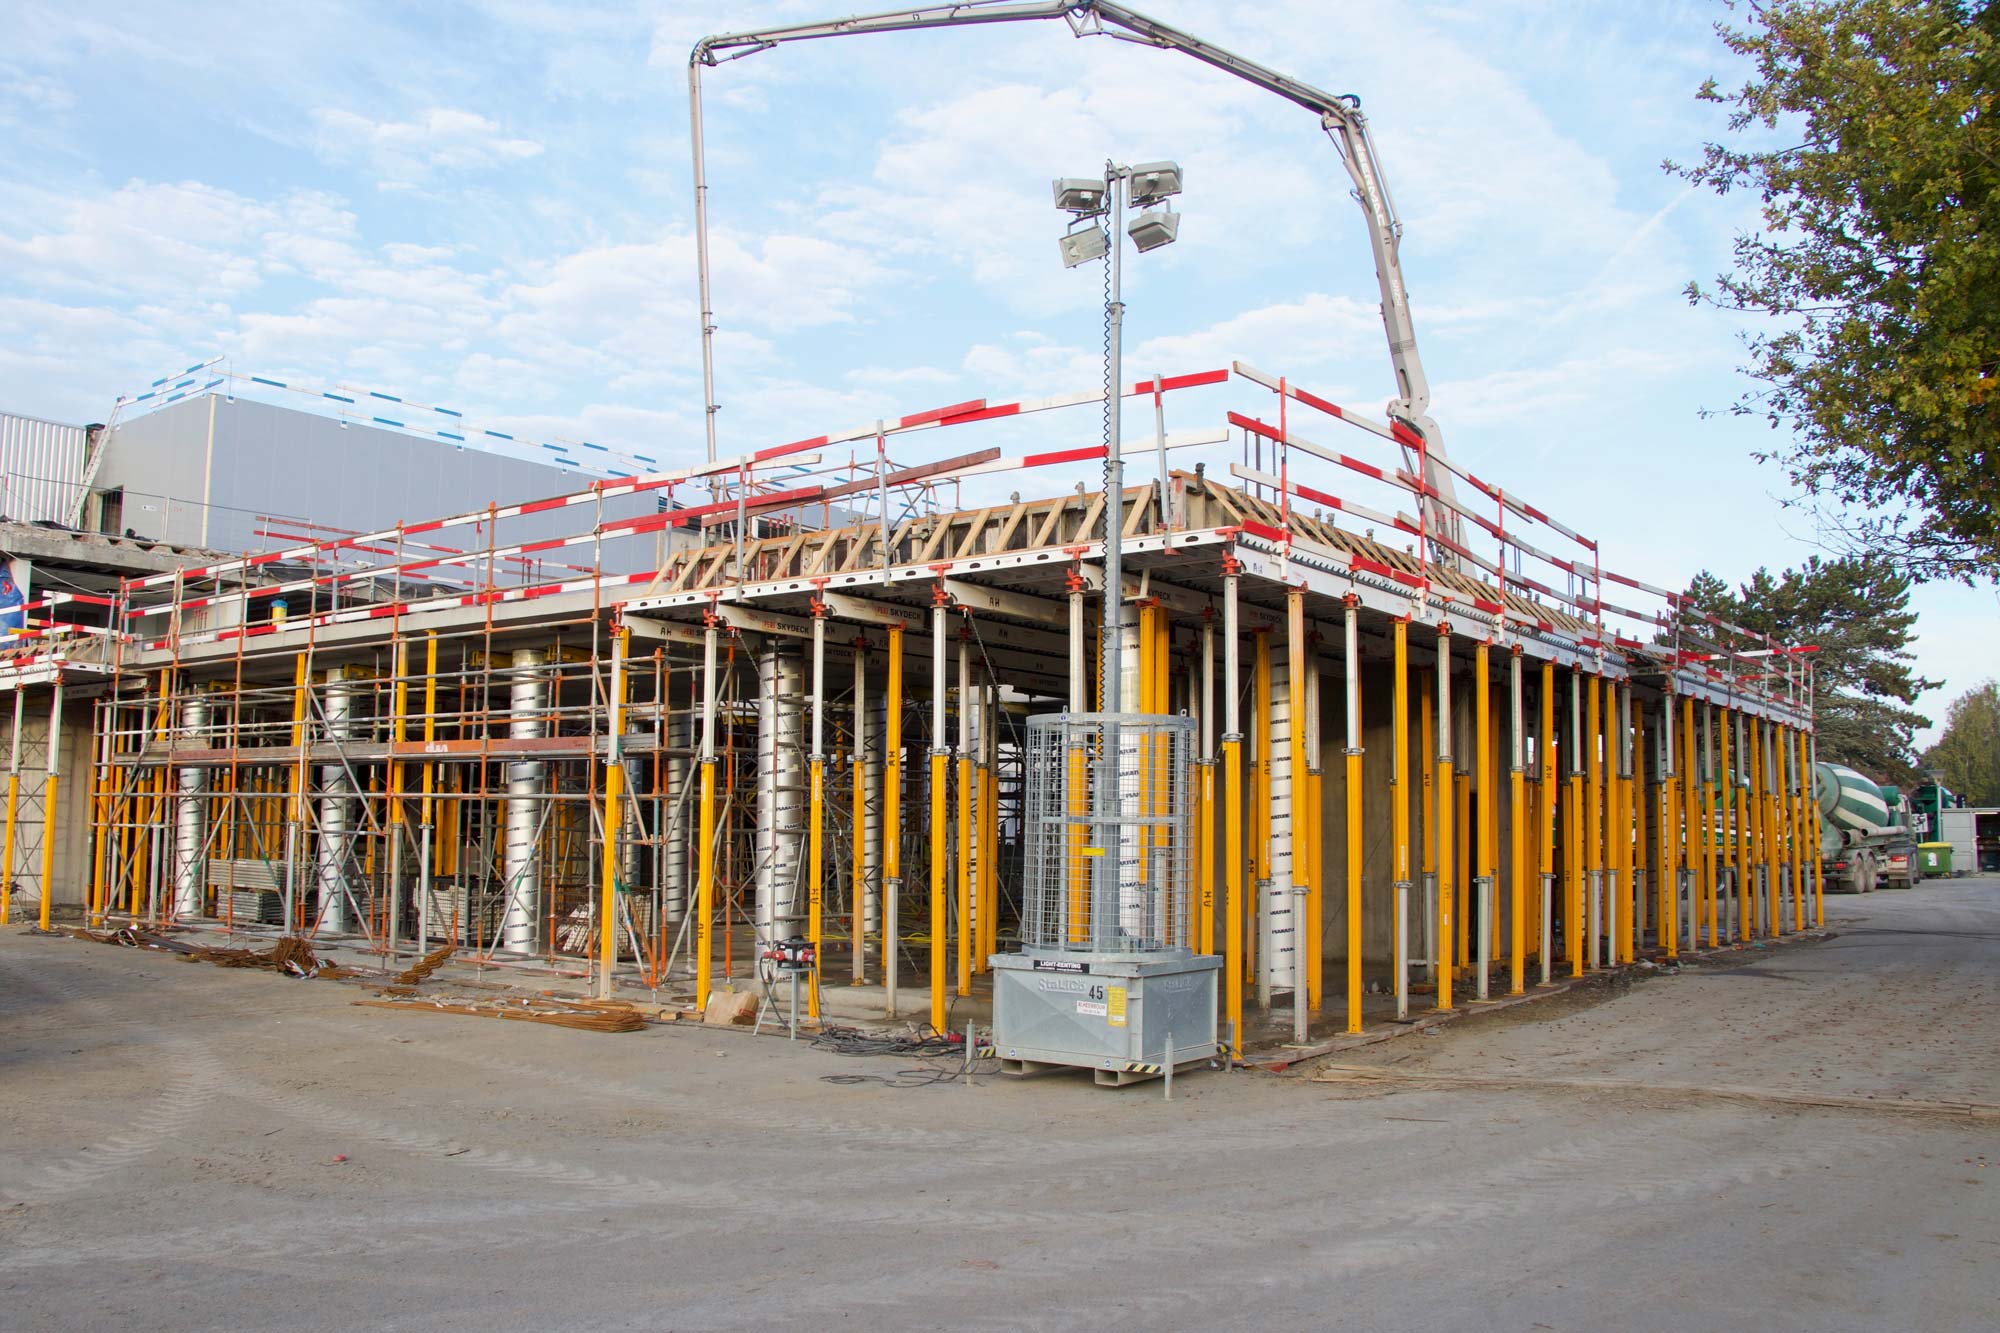 Construction at stow headquarters